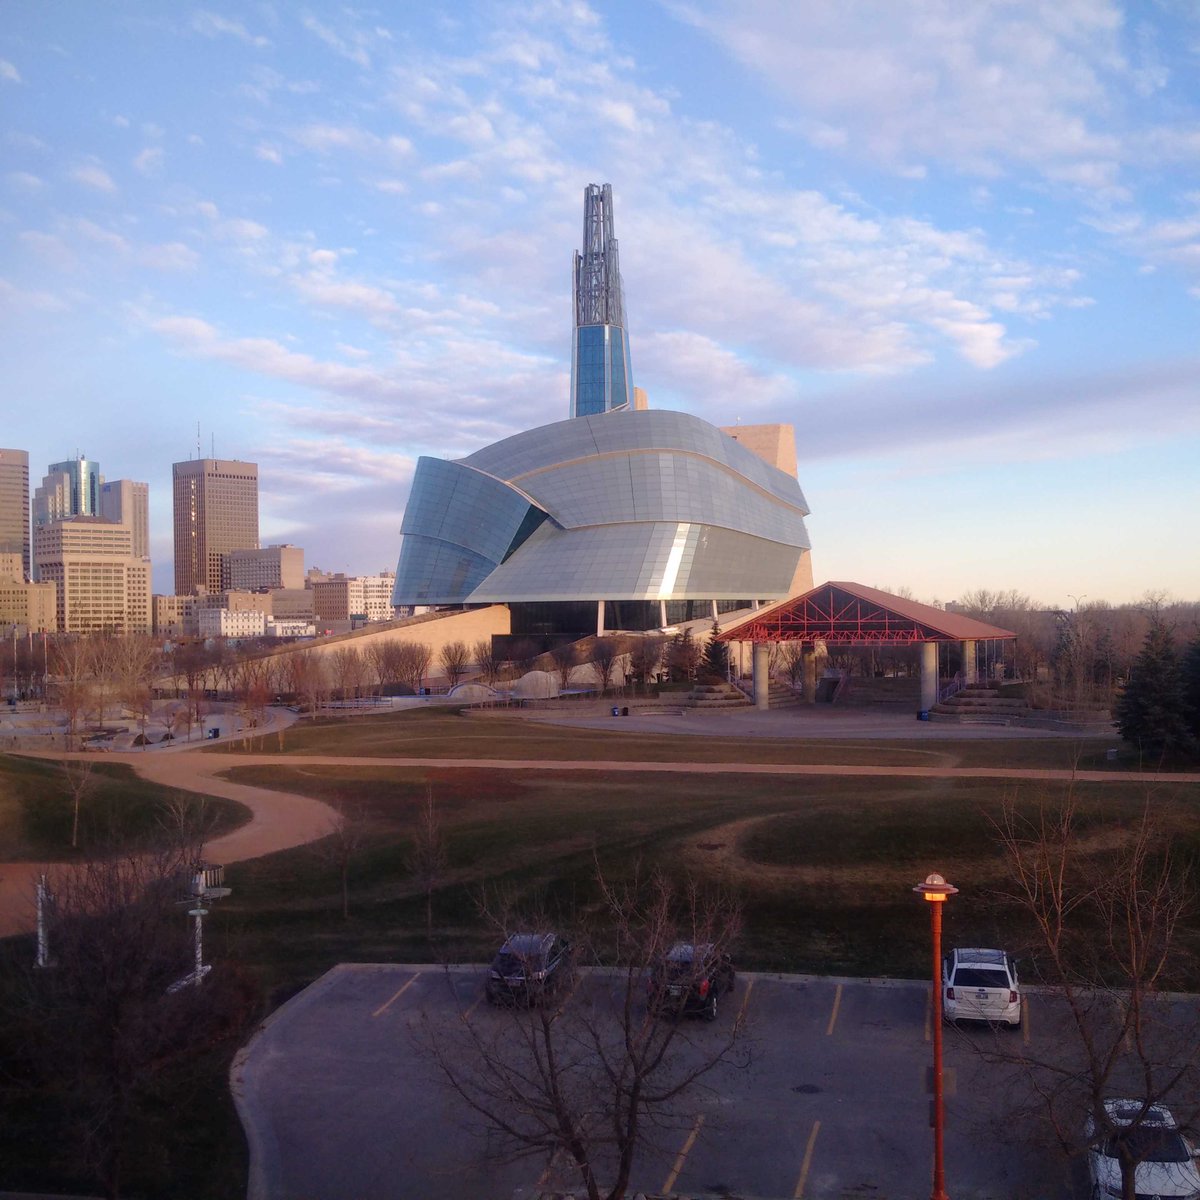 Awesome view from my hotel window. #canadianhumanrightsmuseum #winnipeg